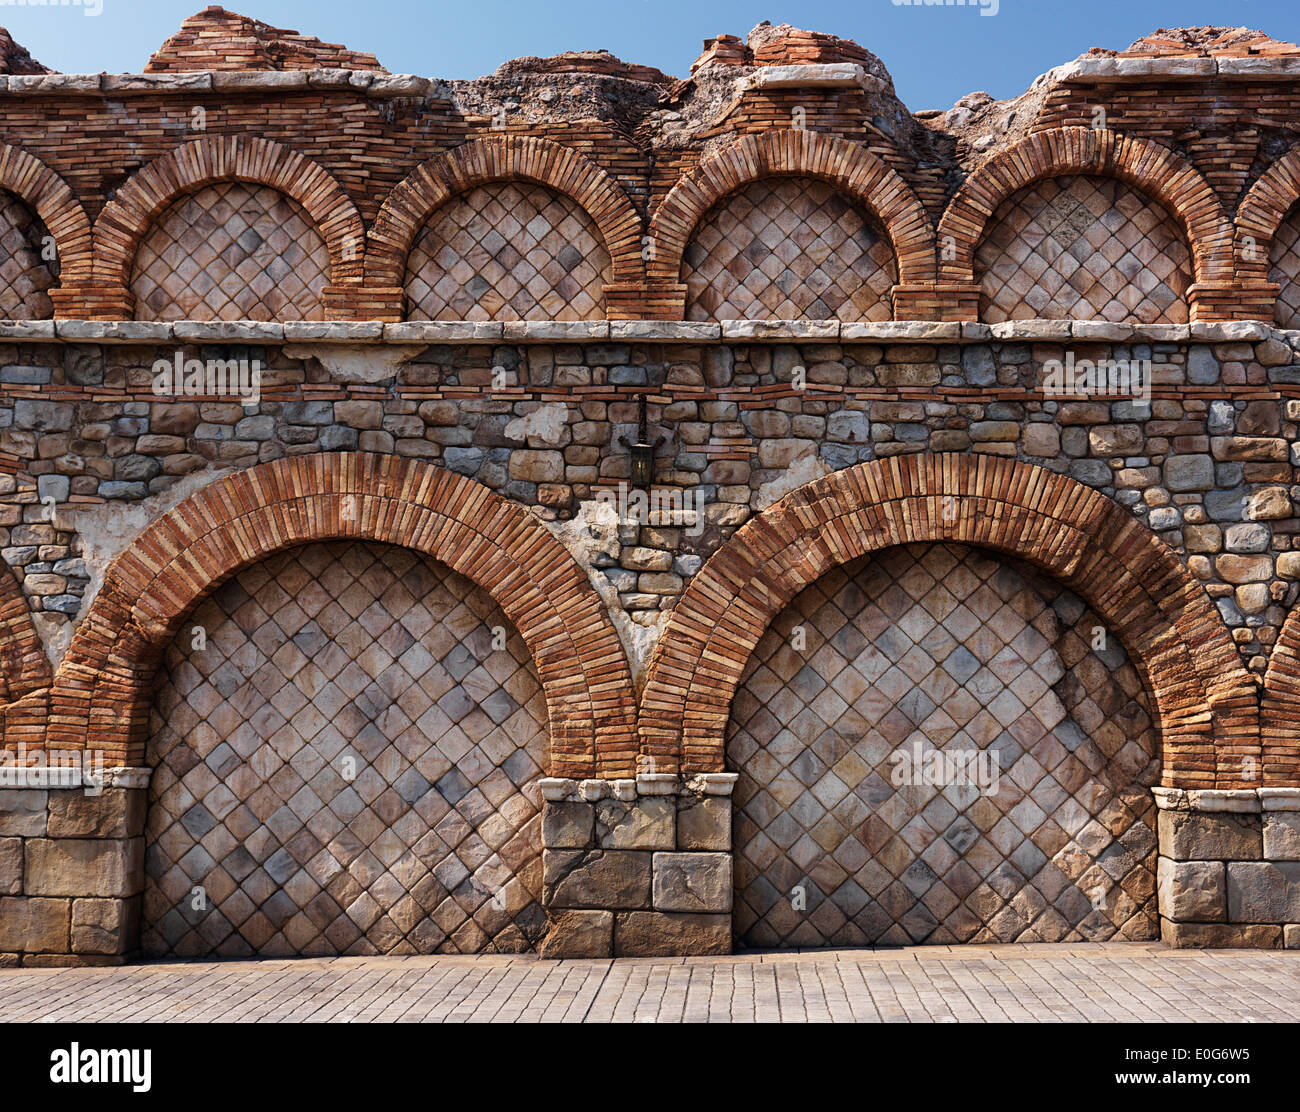 Old stone wall with brick arches antique rustic architectural texture Stock Photo